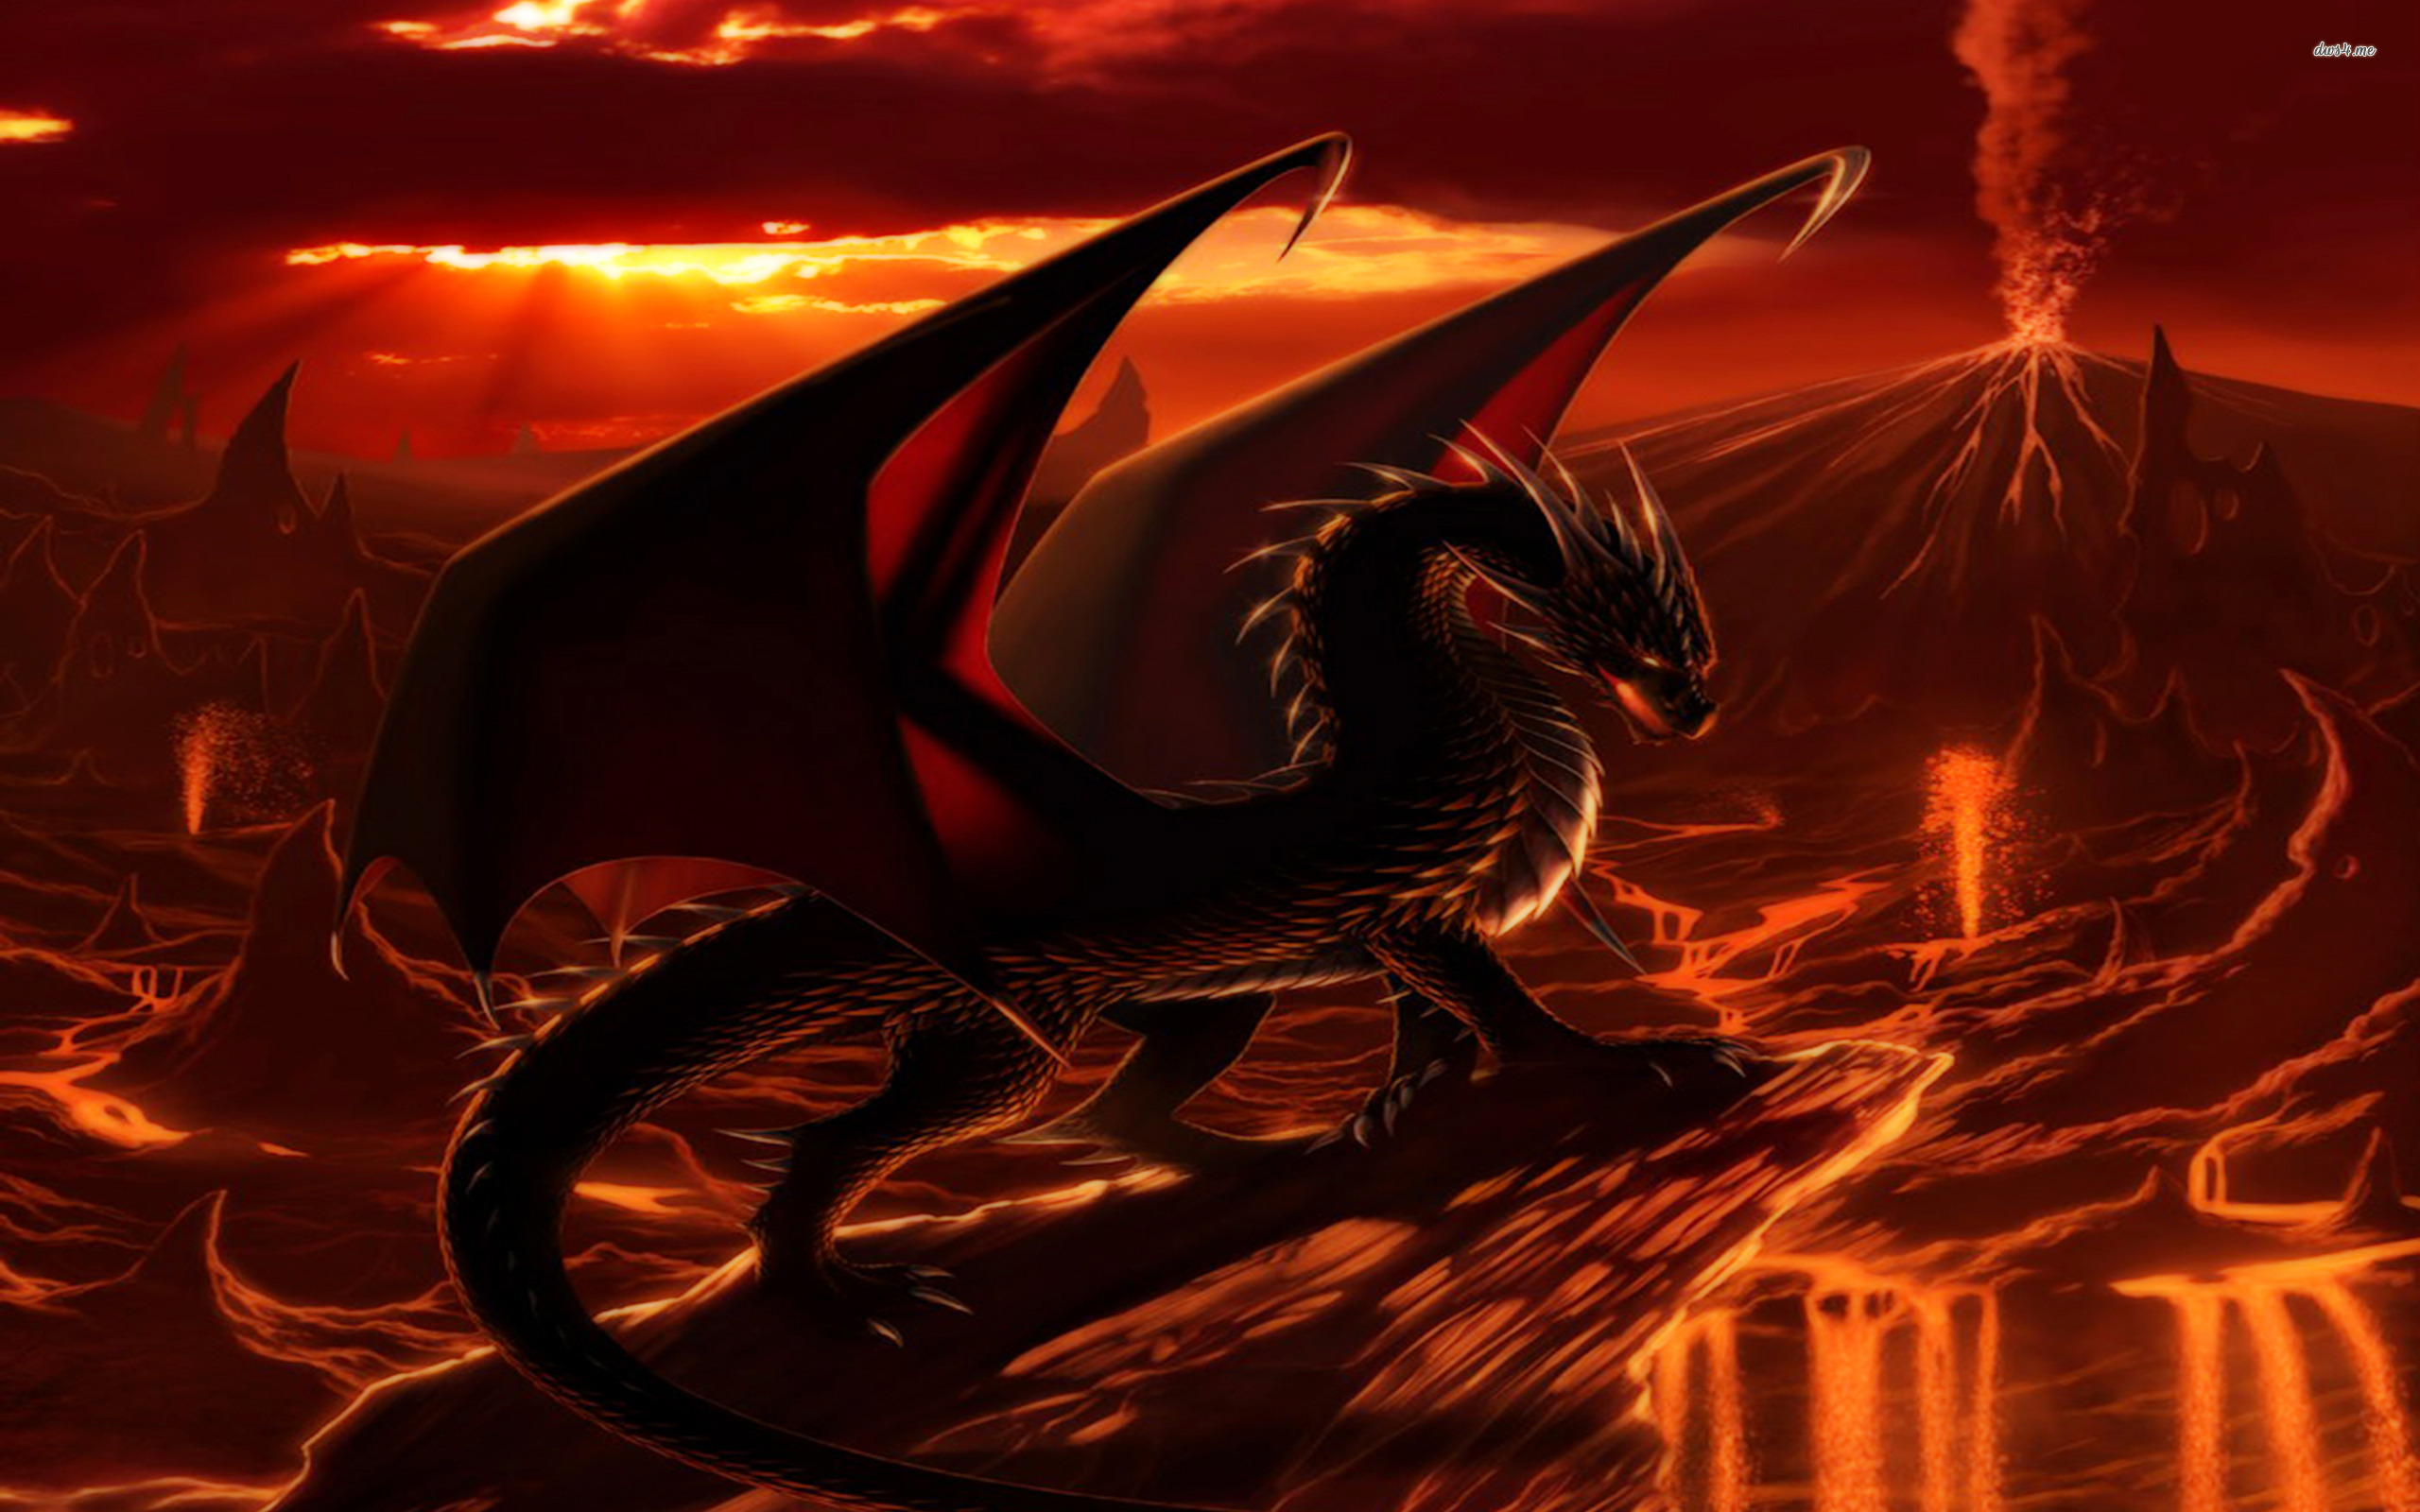 Dragon Fire Cool Backgrounds Wallpapers 9994   Amazing Wallpaperz